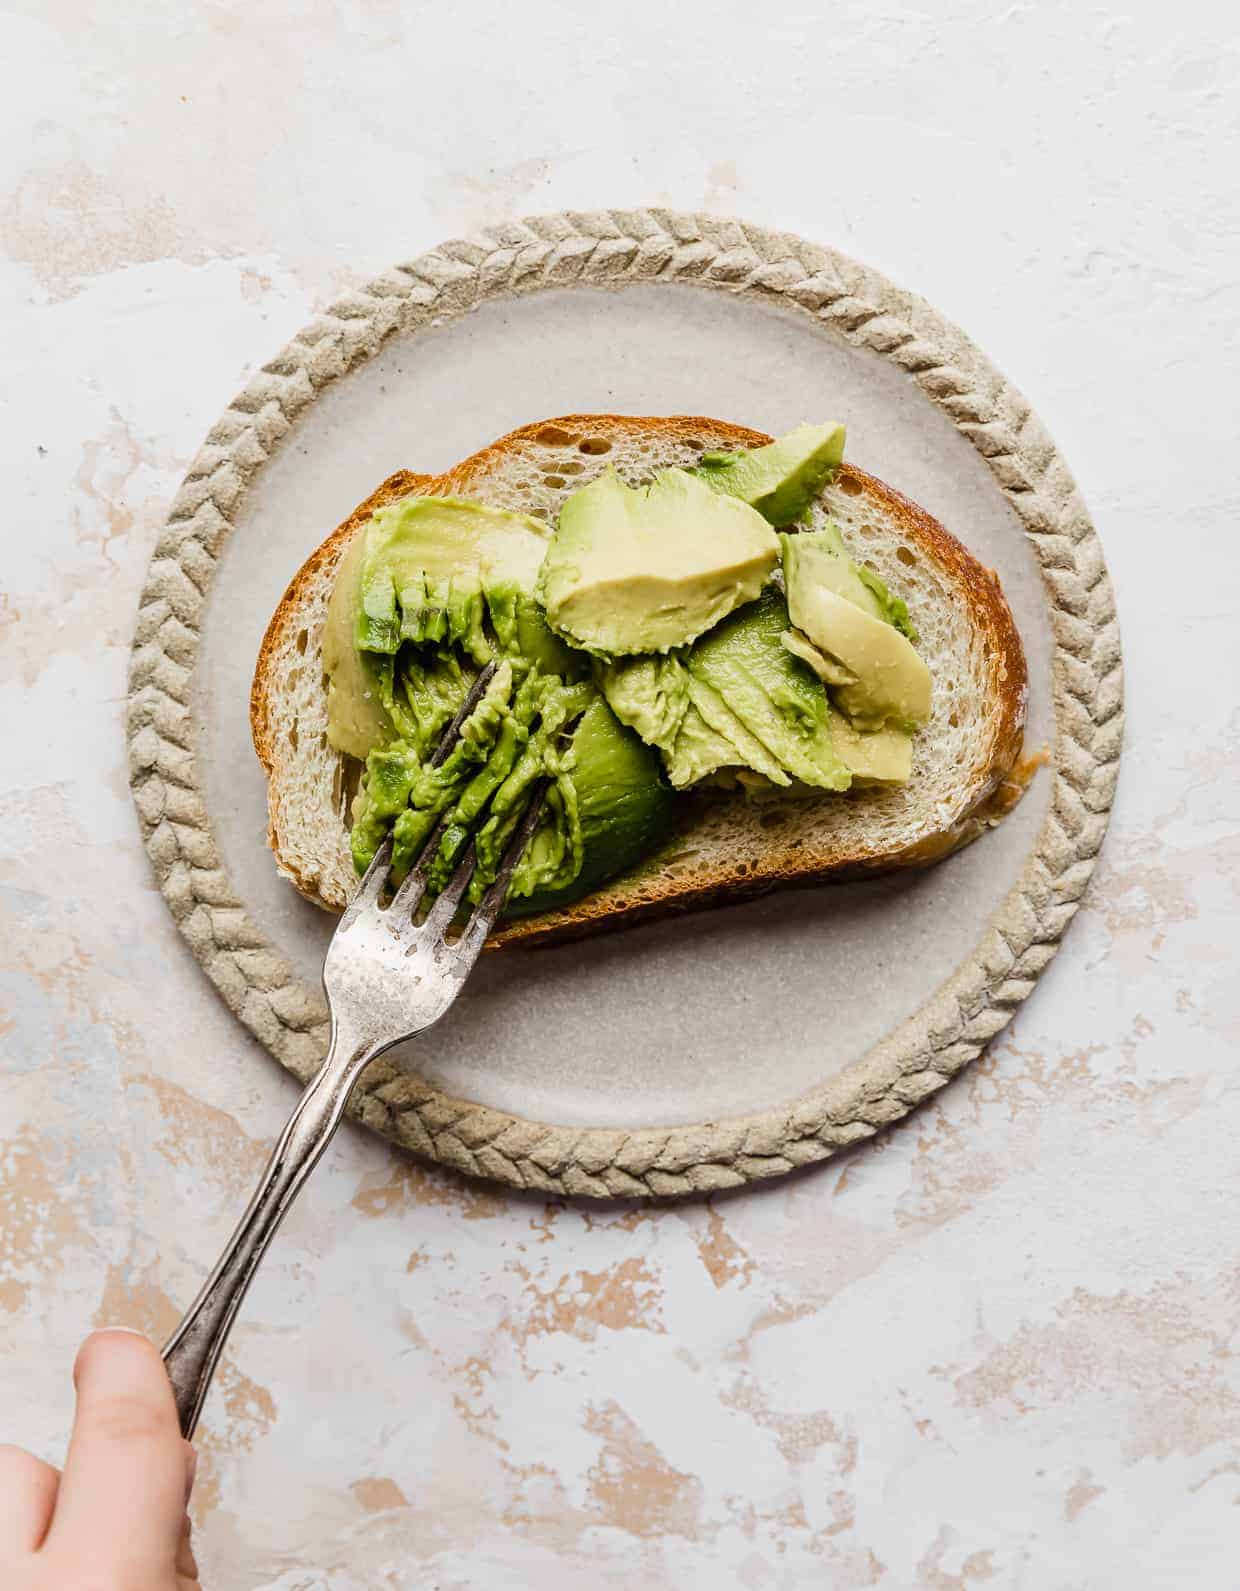 A fork smashing fresh avocado on a slice of toasted bread.